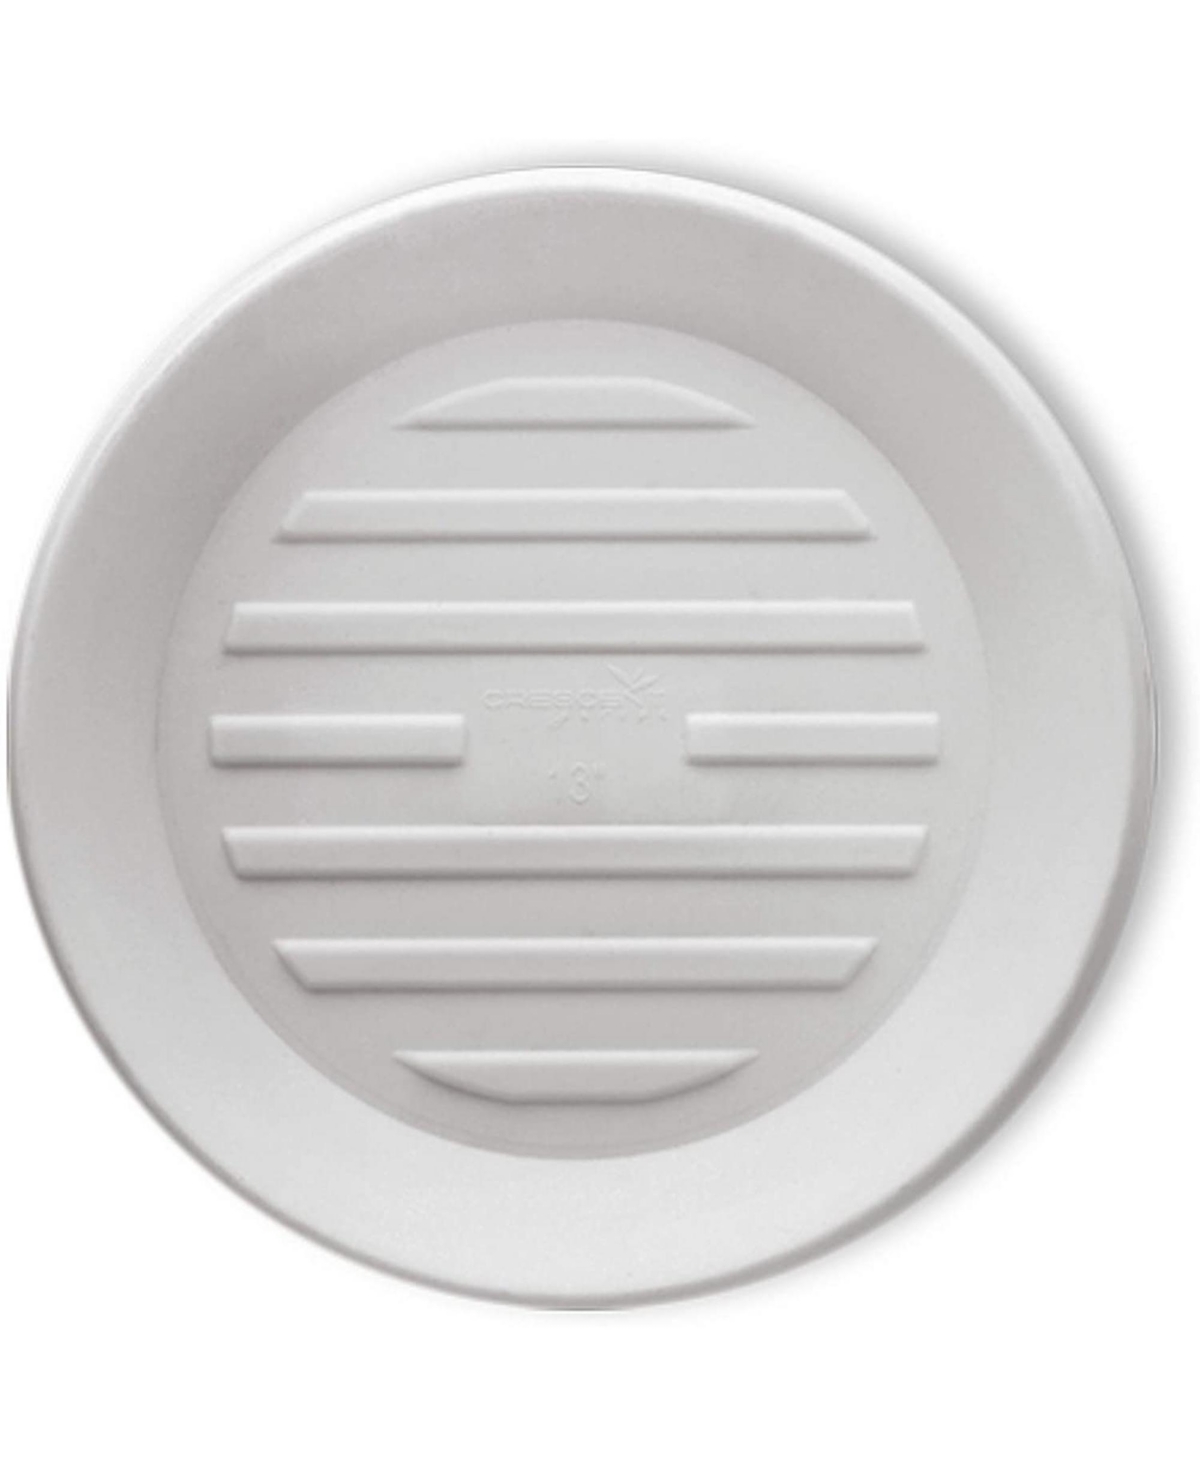 Univ Round Saucer for Potted Plants, Alpine White, 23.5in - White